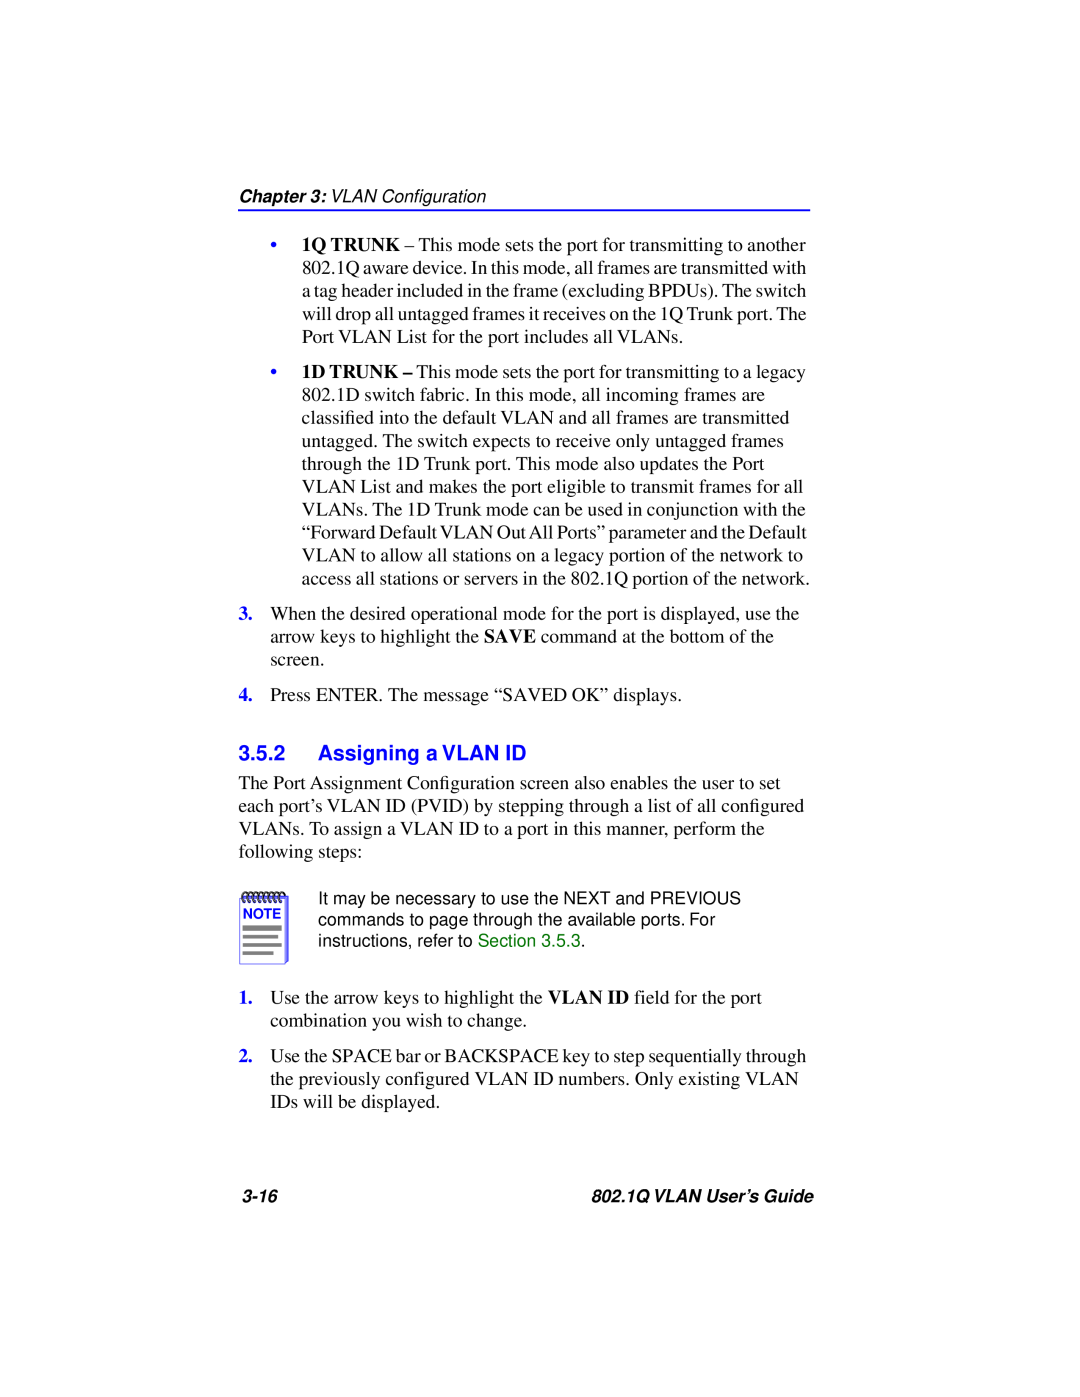 Cabletron Systems 802.1Q manual Assigning a VLAN ID 